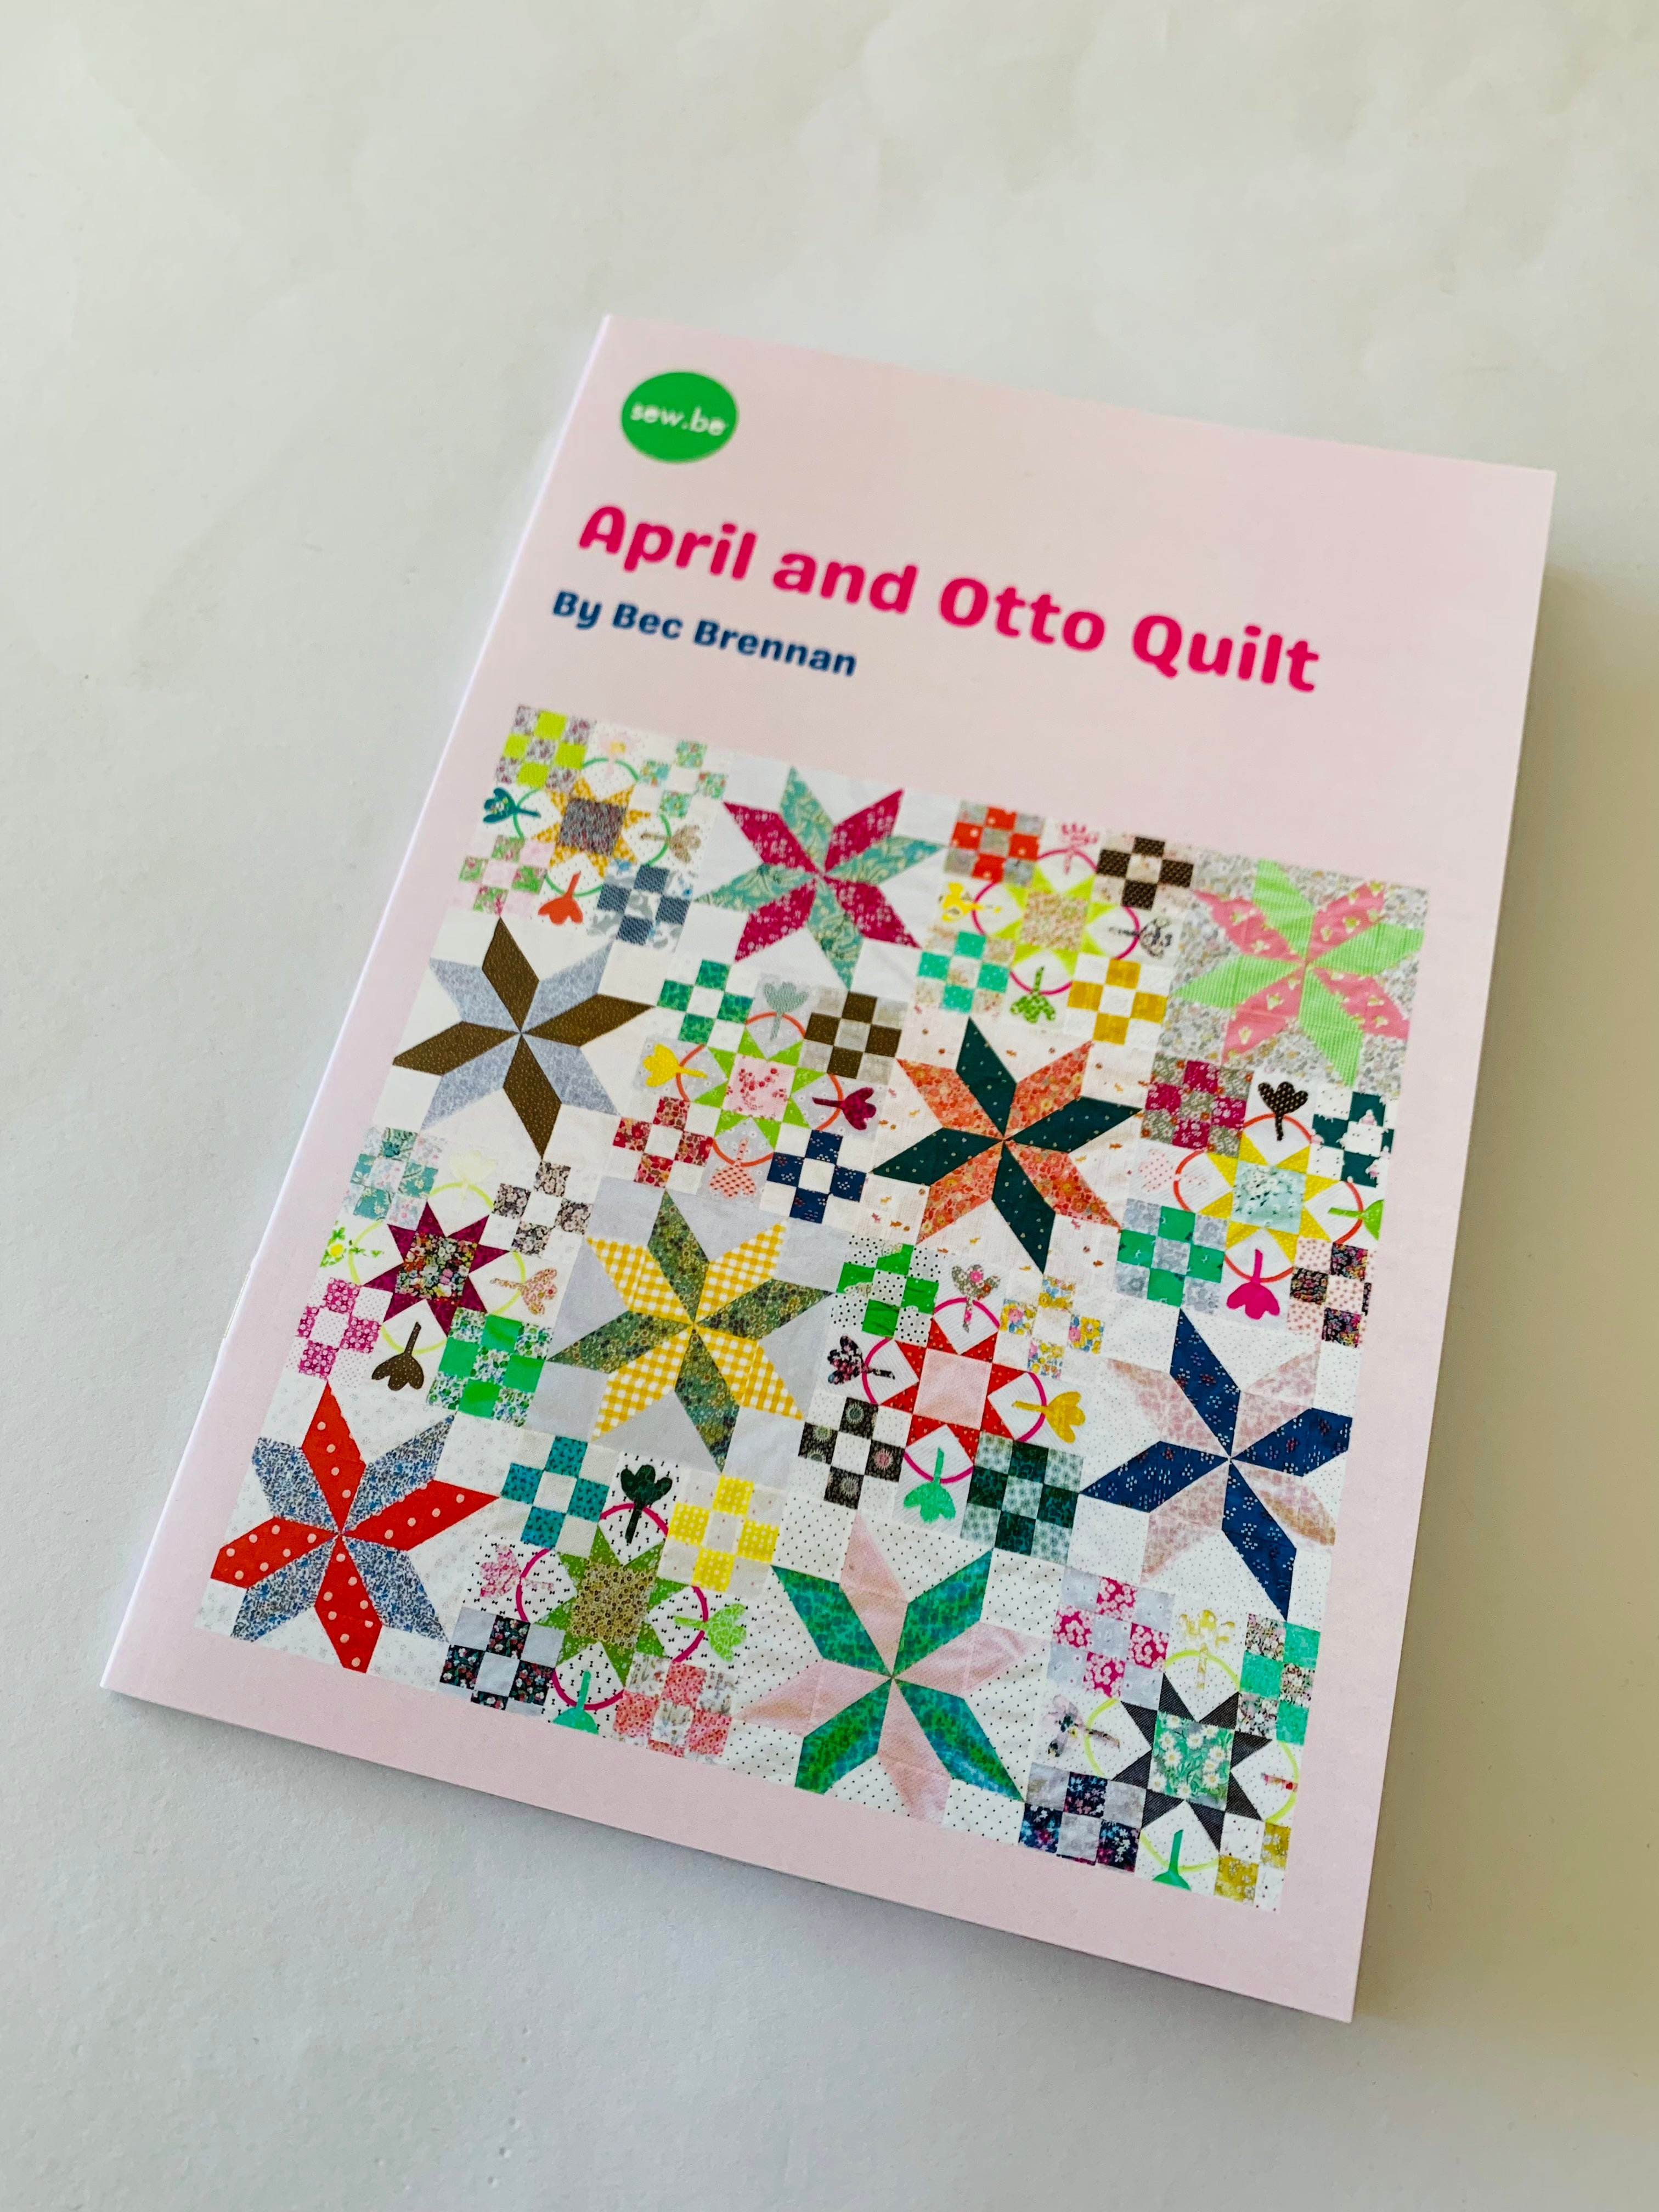 SALE  Sew be: April and Otto quilt pattern